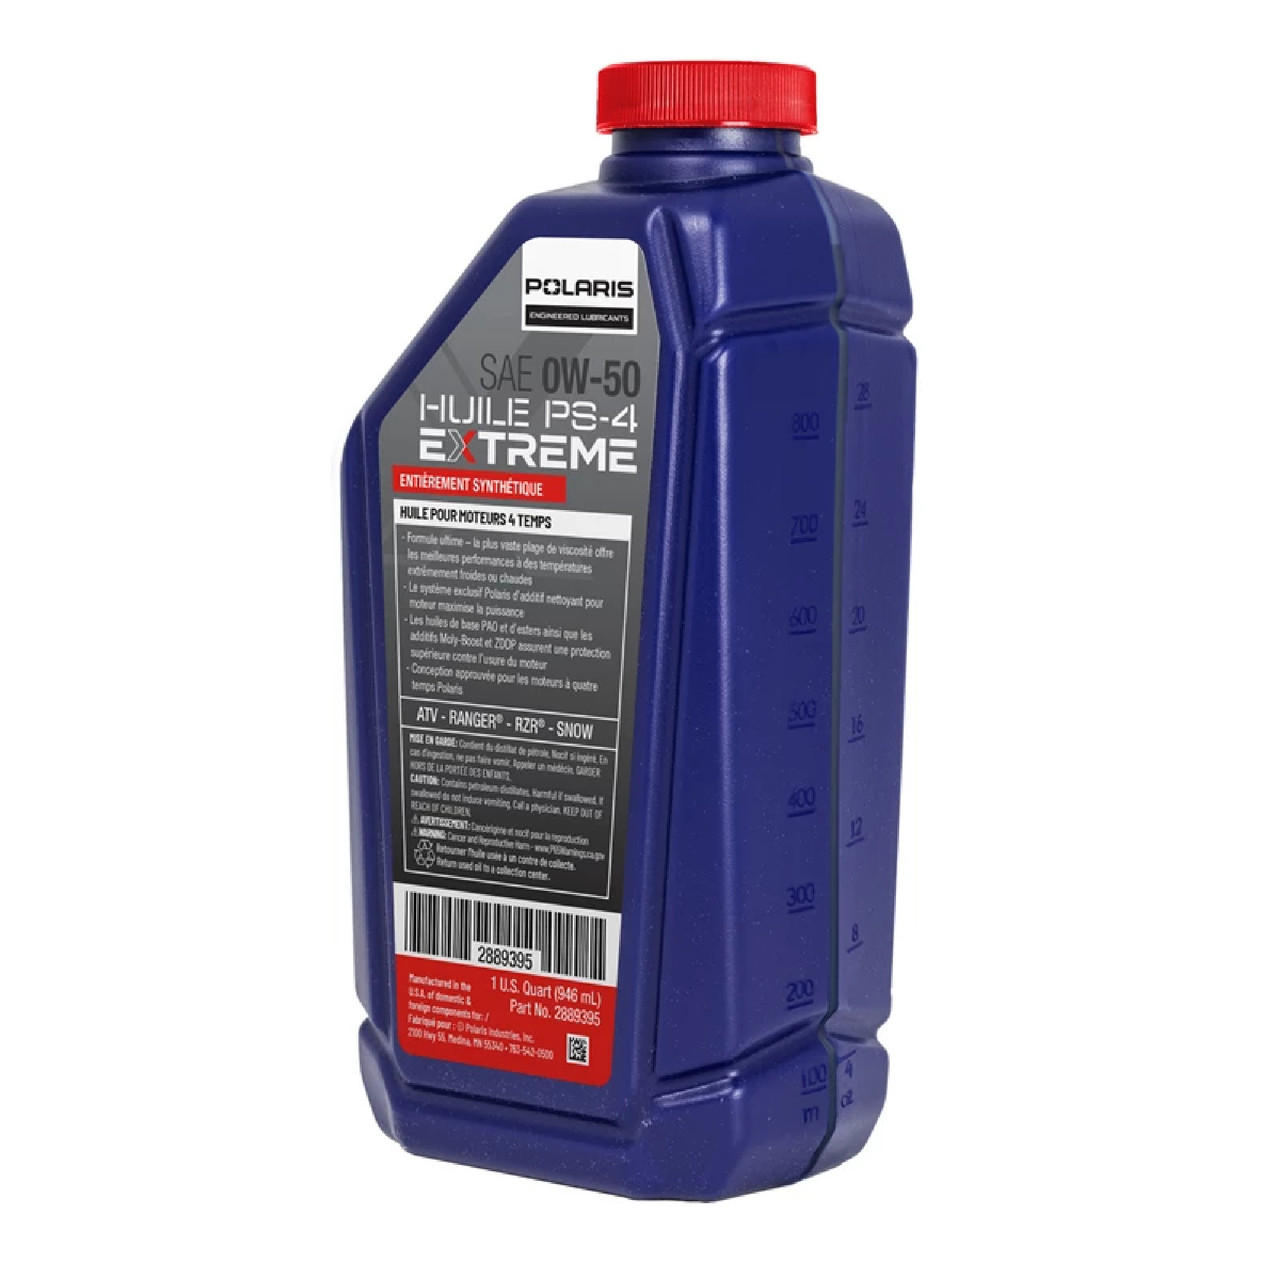 Polaris New OEM 10/PK PS-4 Extreme Full Synthetic 0W-50 Engine Oil 1qt, 2889395